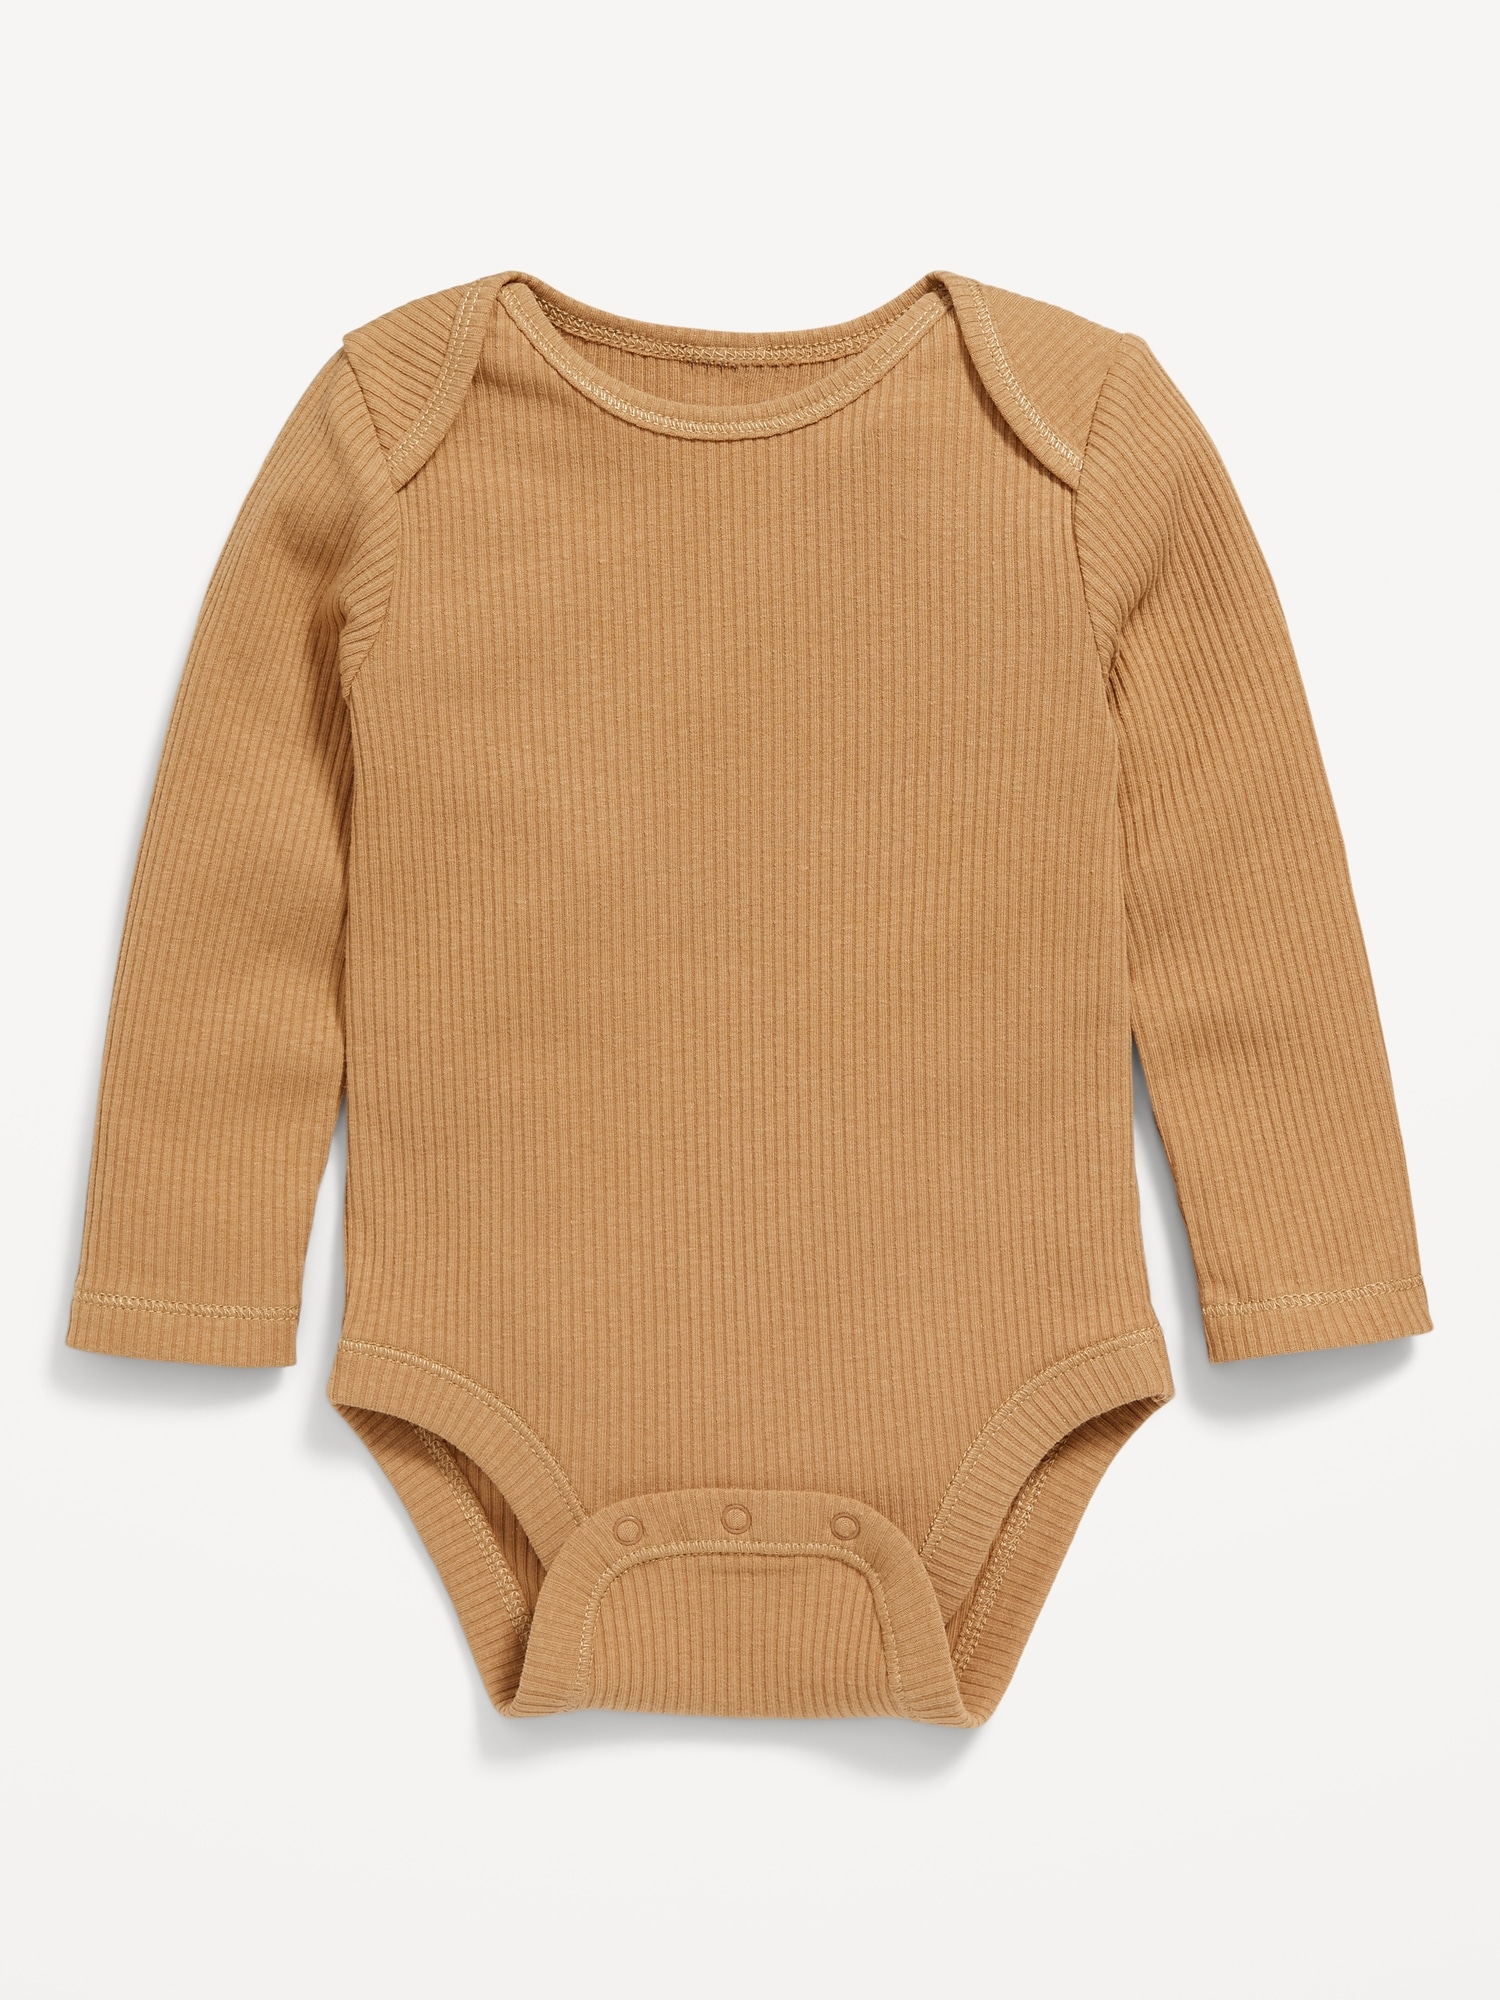 Old Navy Rib Knit Cotton Bodysuit Review, Editor Review